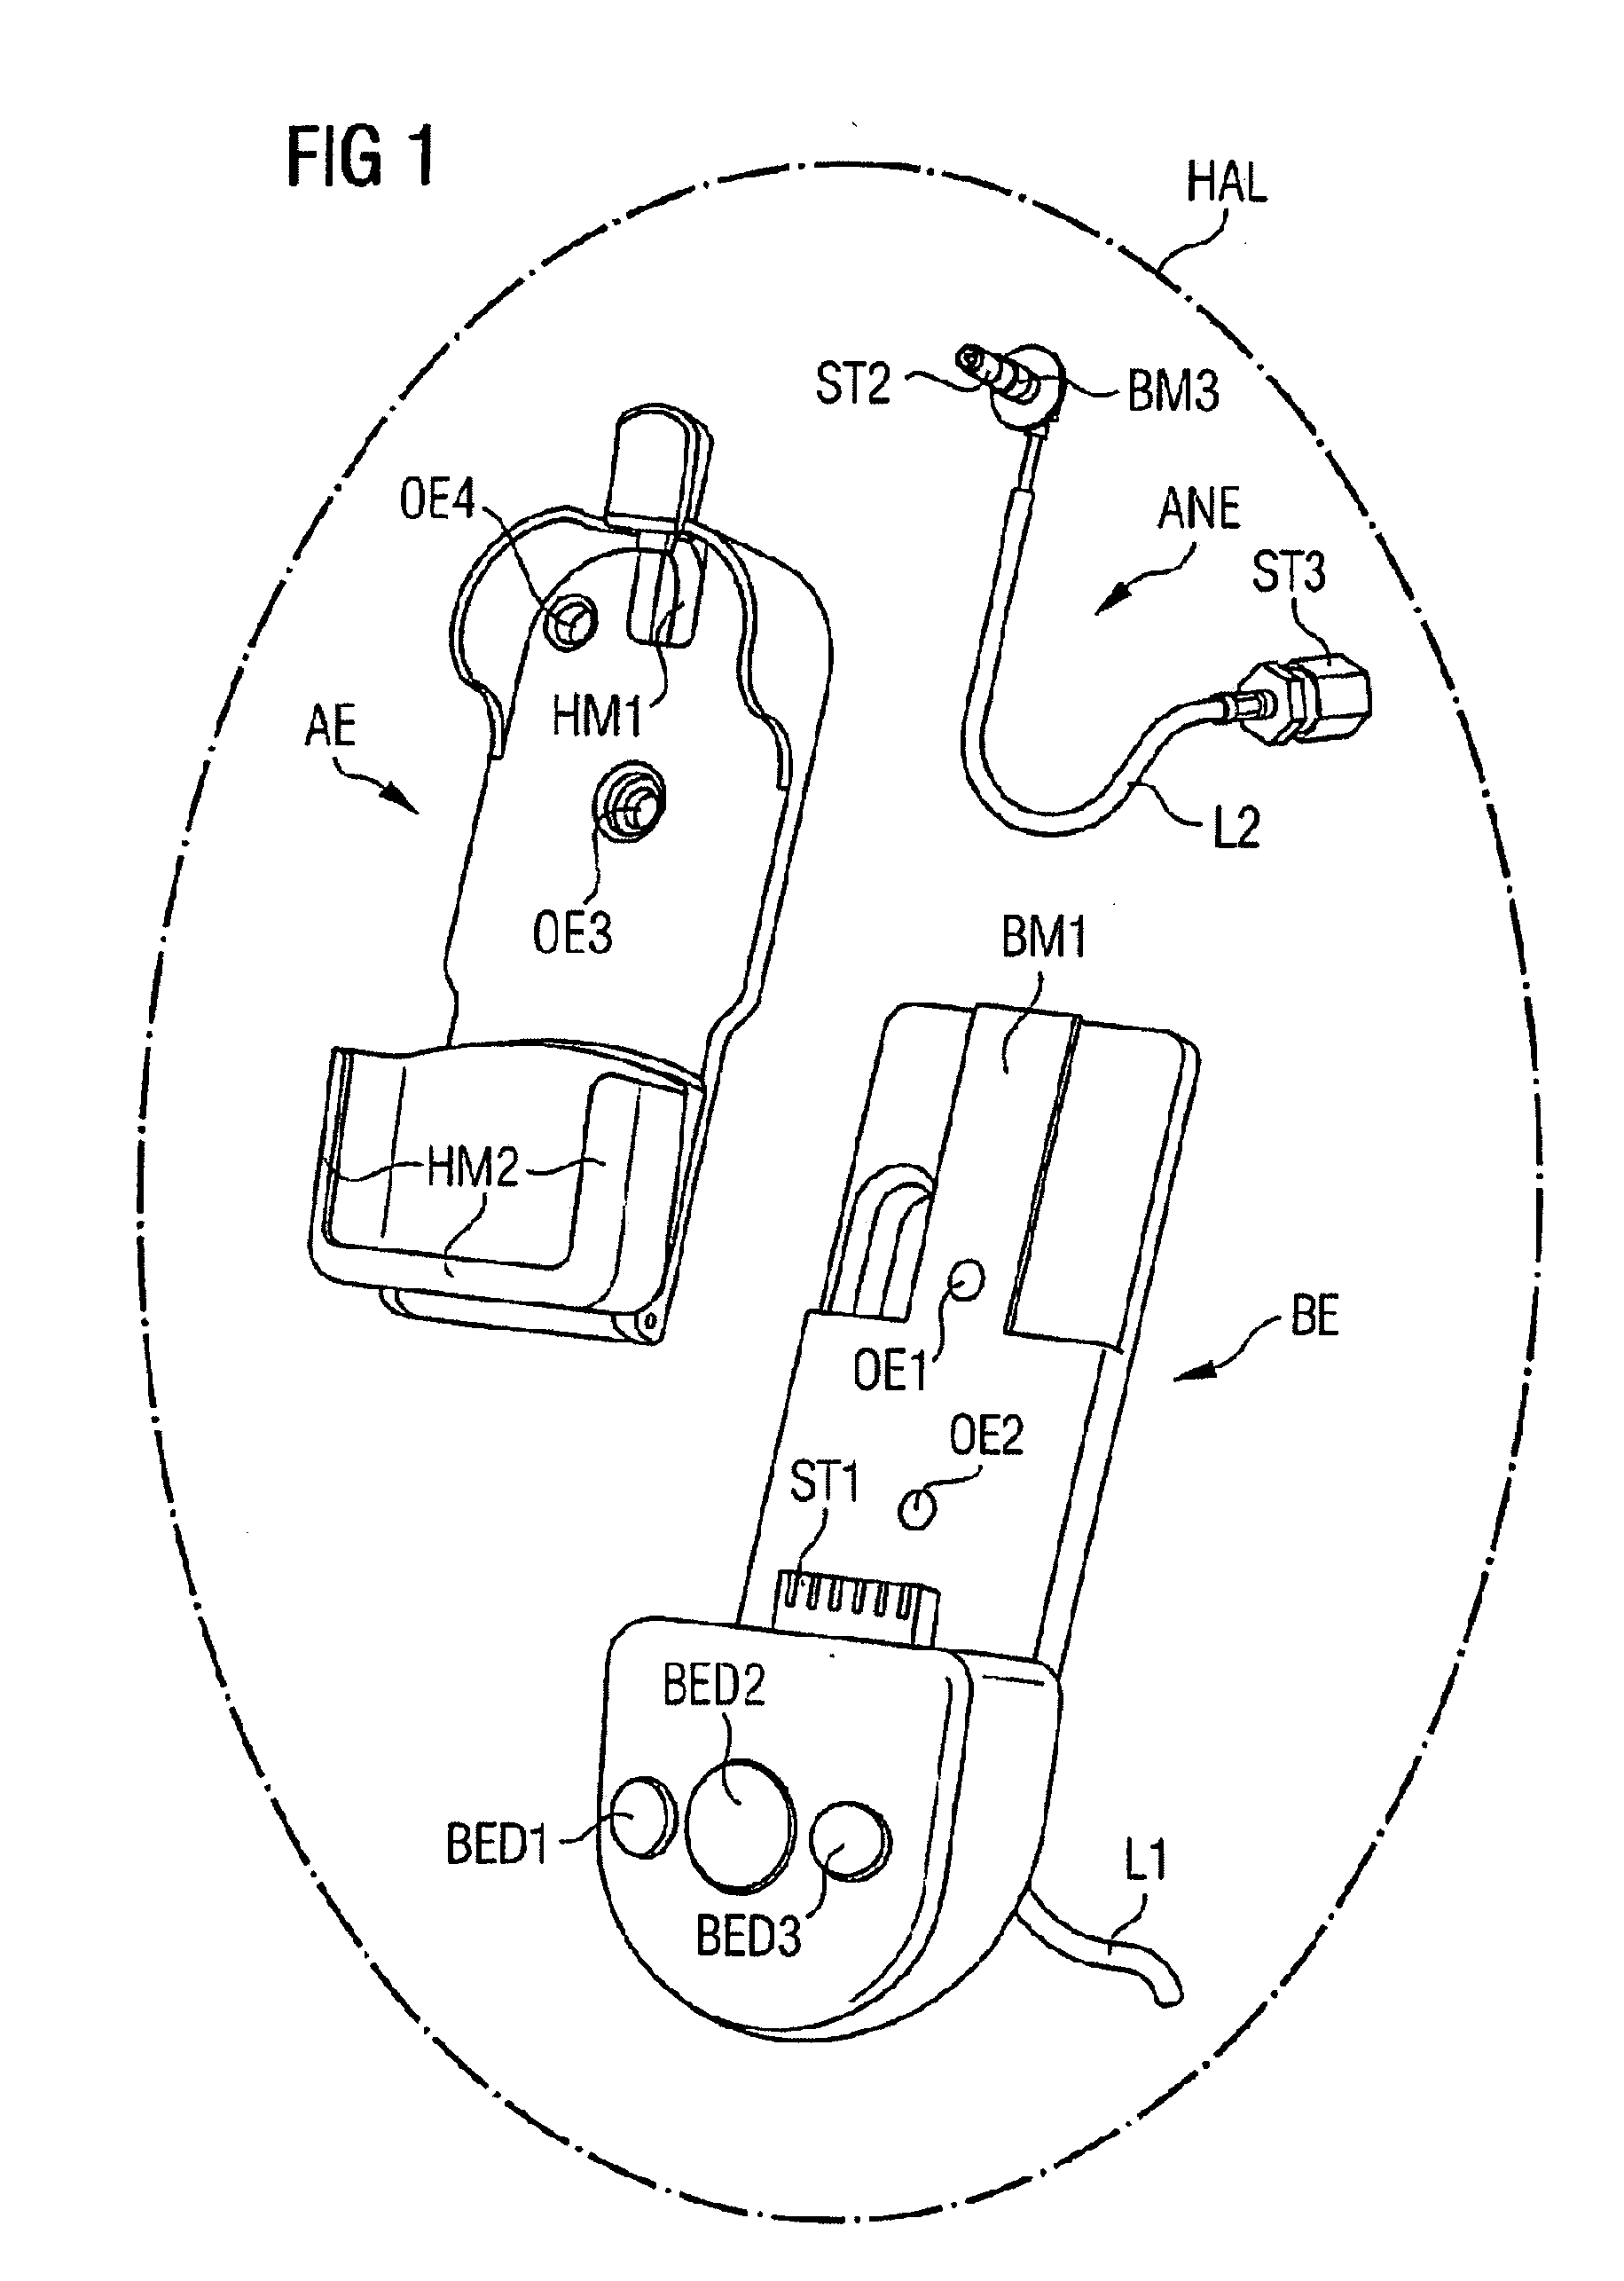 Holder for an electronic device